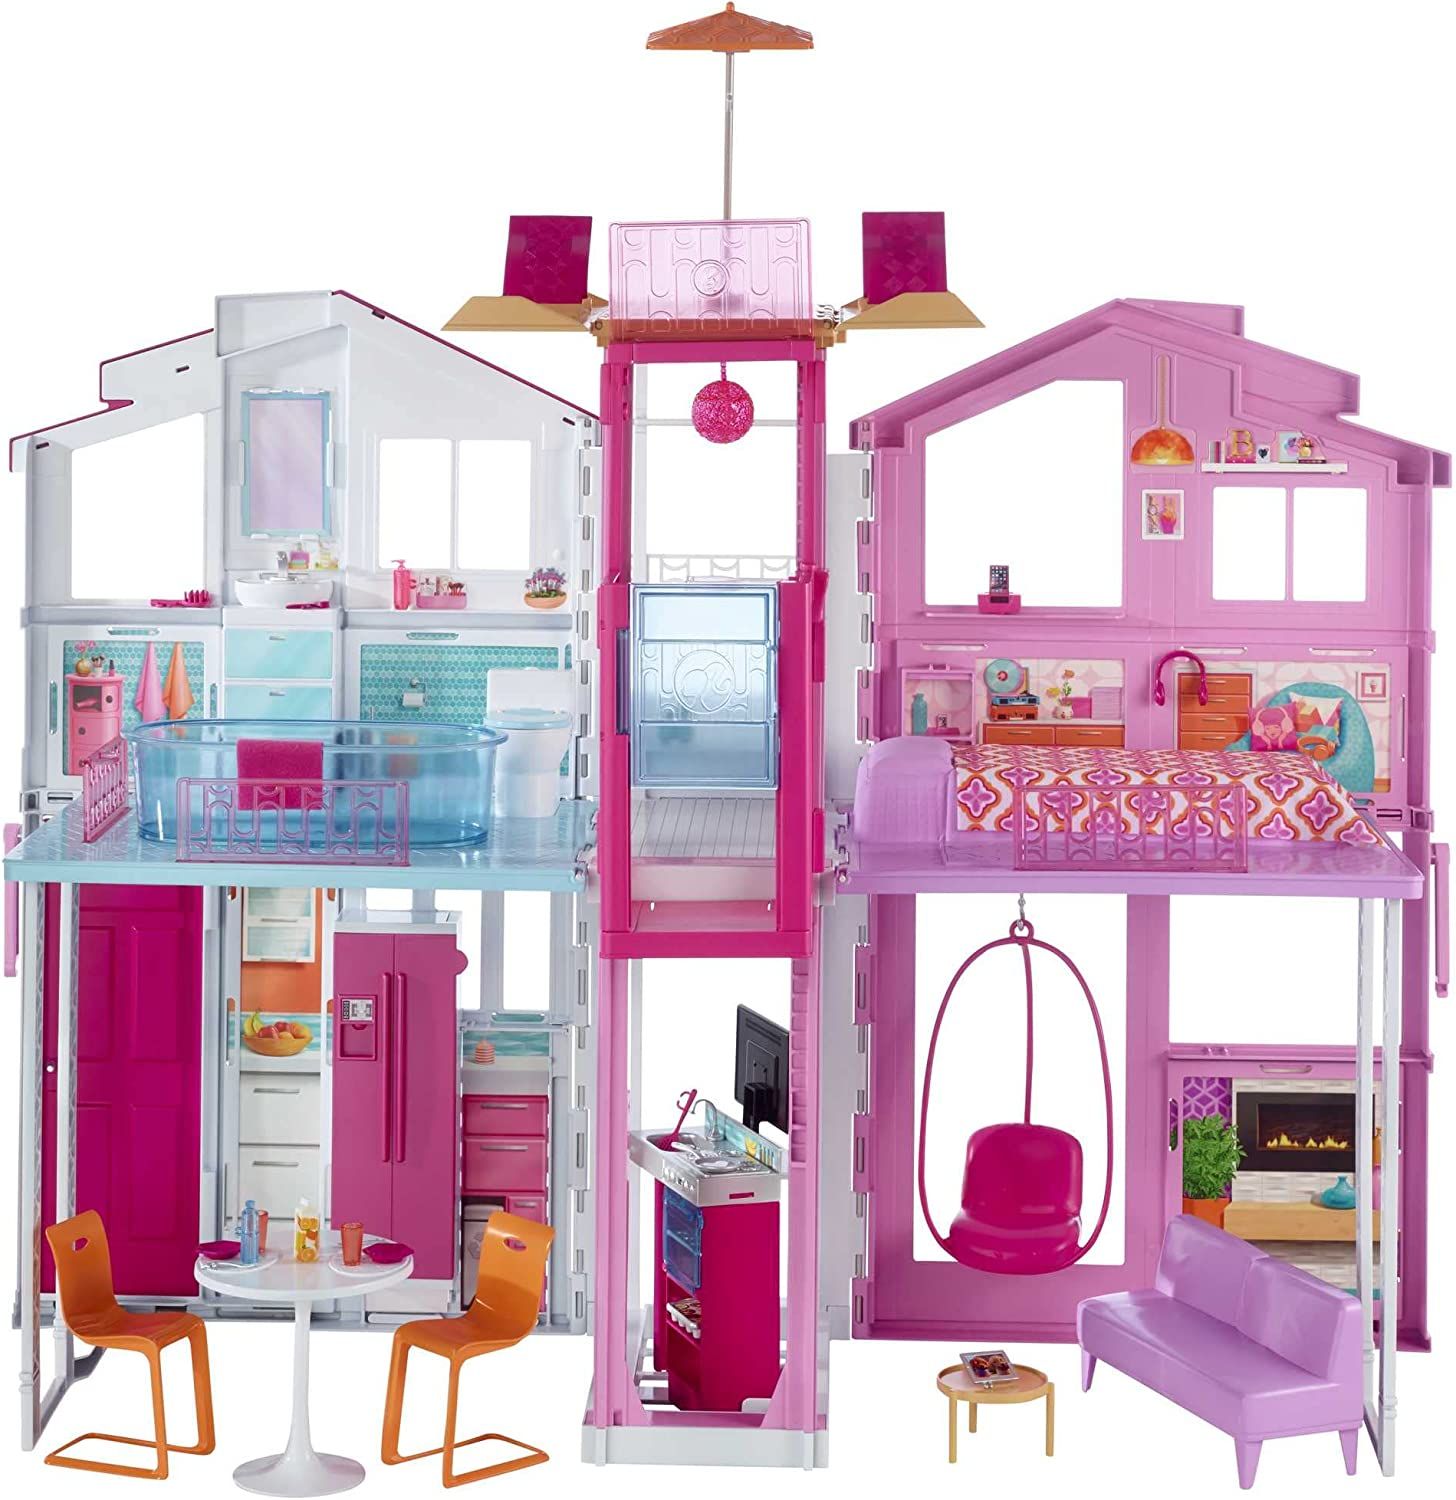 Null Barbie - The Big Deluxe Doll House with 2 Floors and 4 rooms including Kitc&hellip;